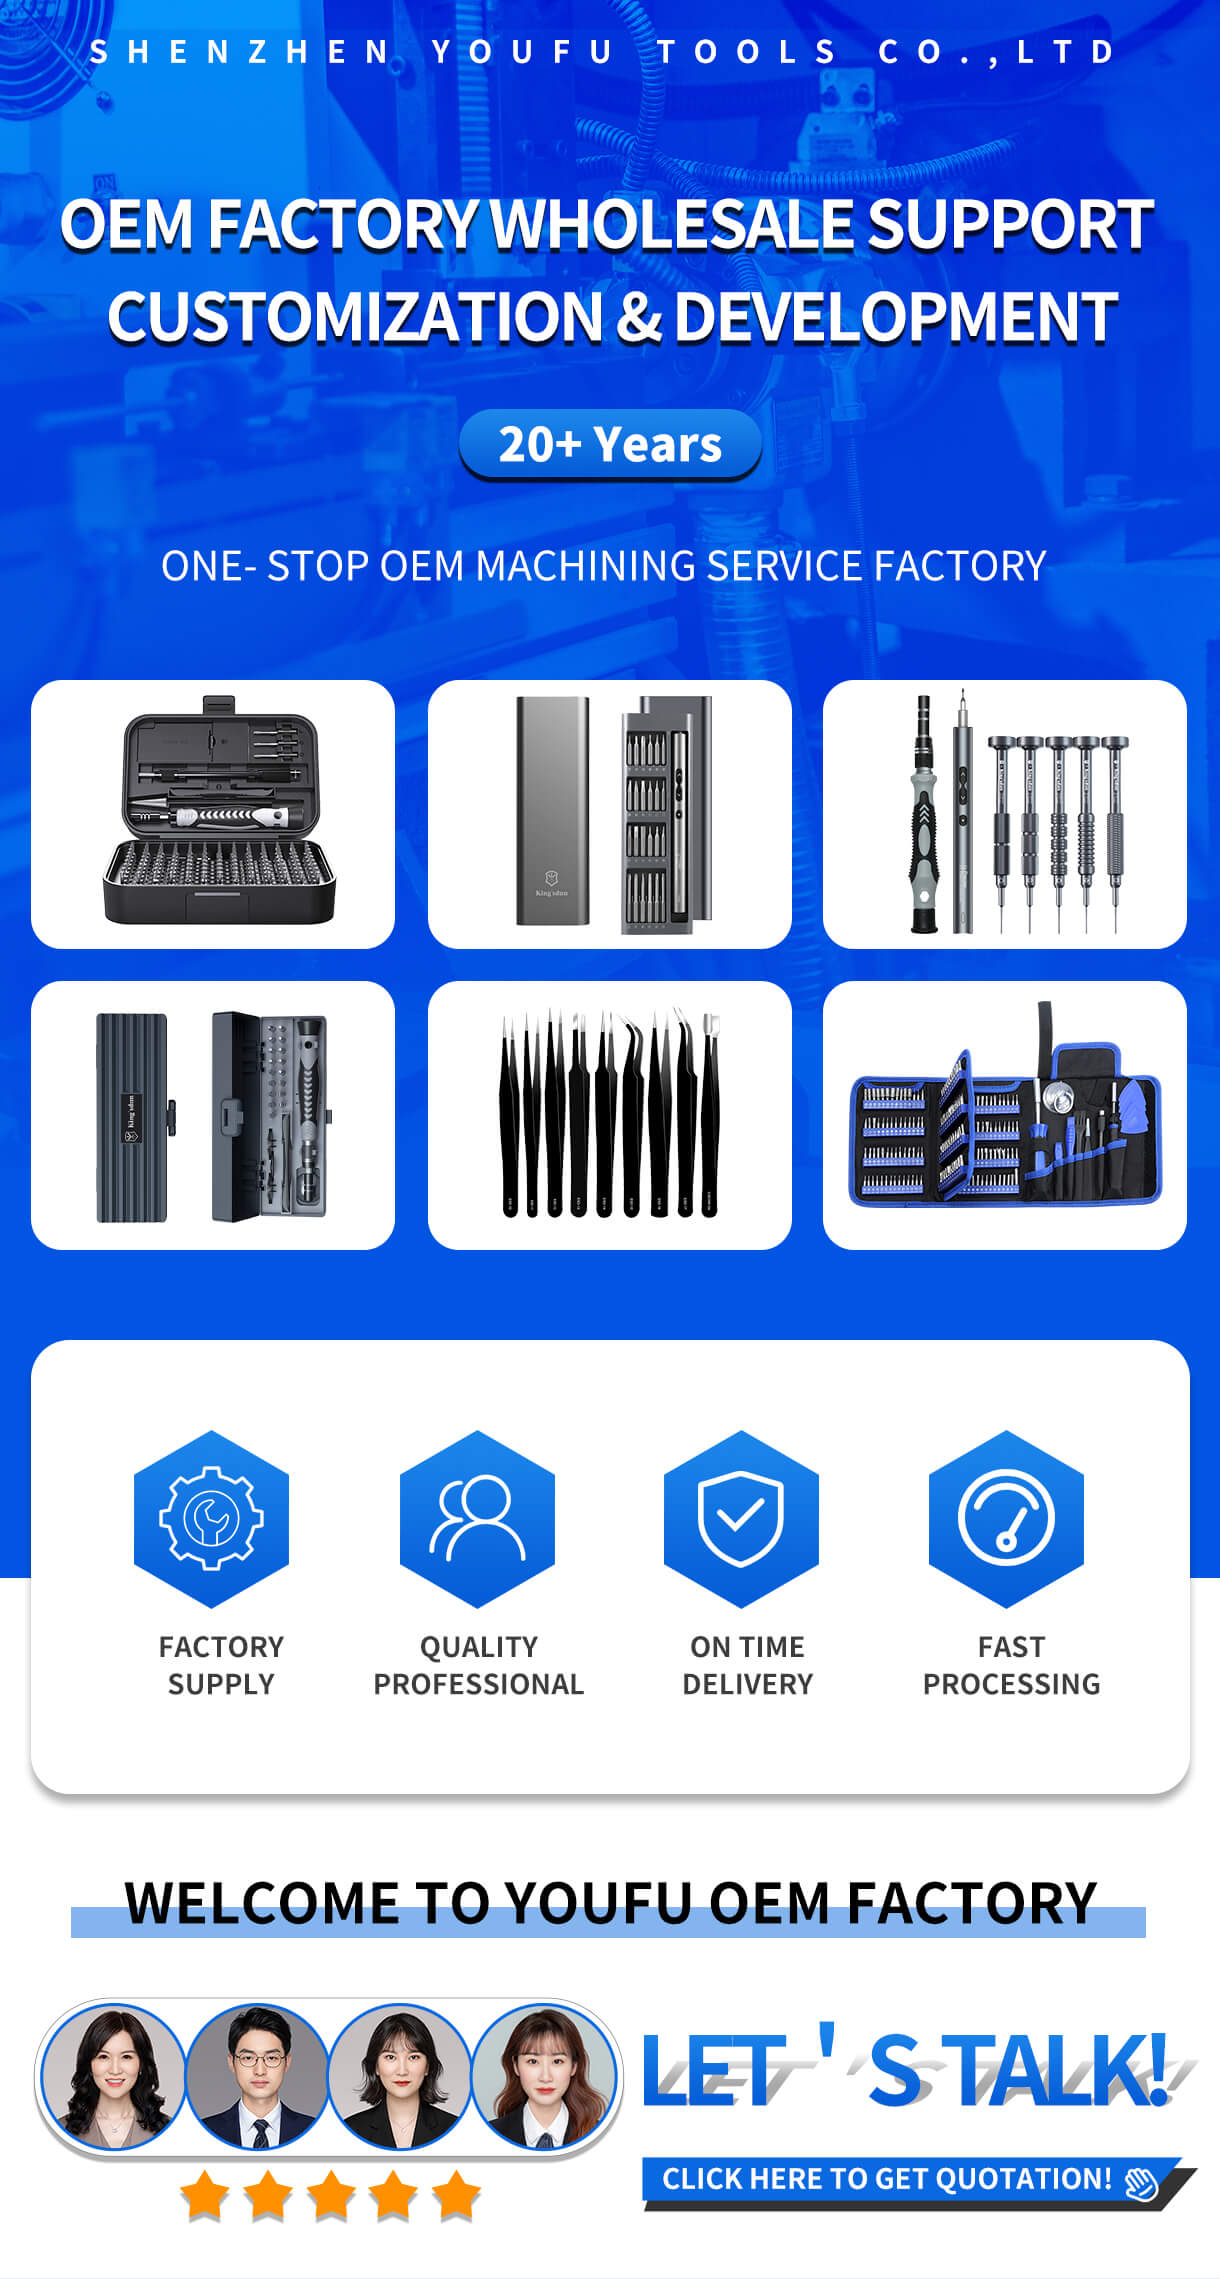 31pcs screwdriver bits are designed for repairing Electronics, iPhone, iPad, Apple Watch, Android smartphone, tablet, Macbook, computer, laptop, game consoles, Switch, Xbox, PlayStation, watches, camera, eyeglasses, toys and more. Slim size makes the set an ideal pocket product.